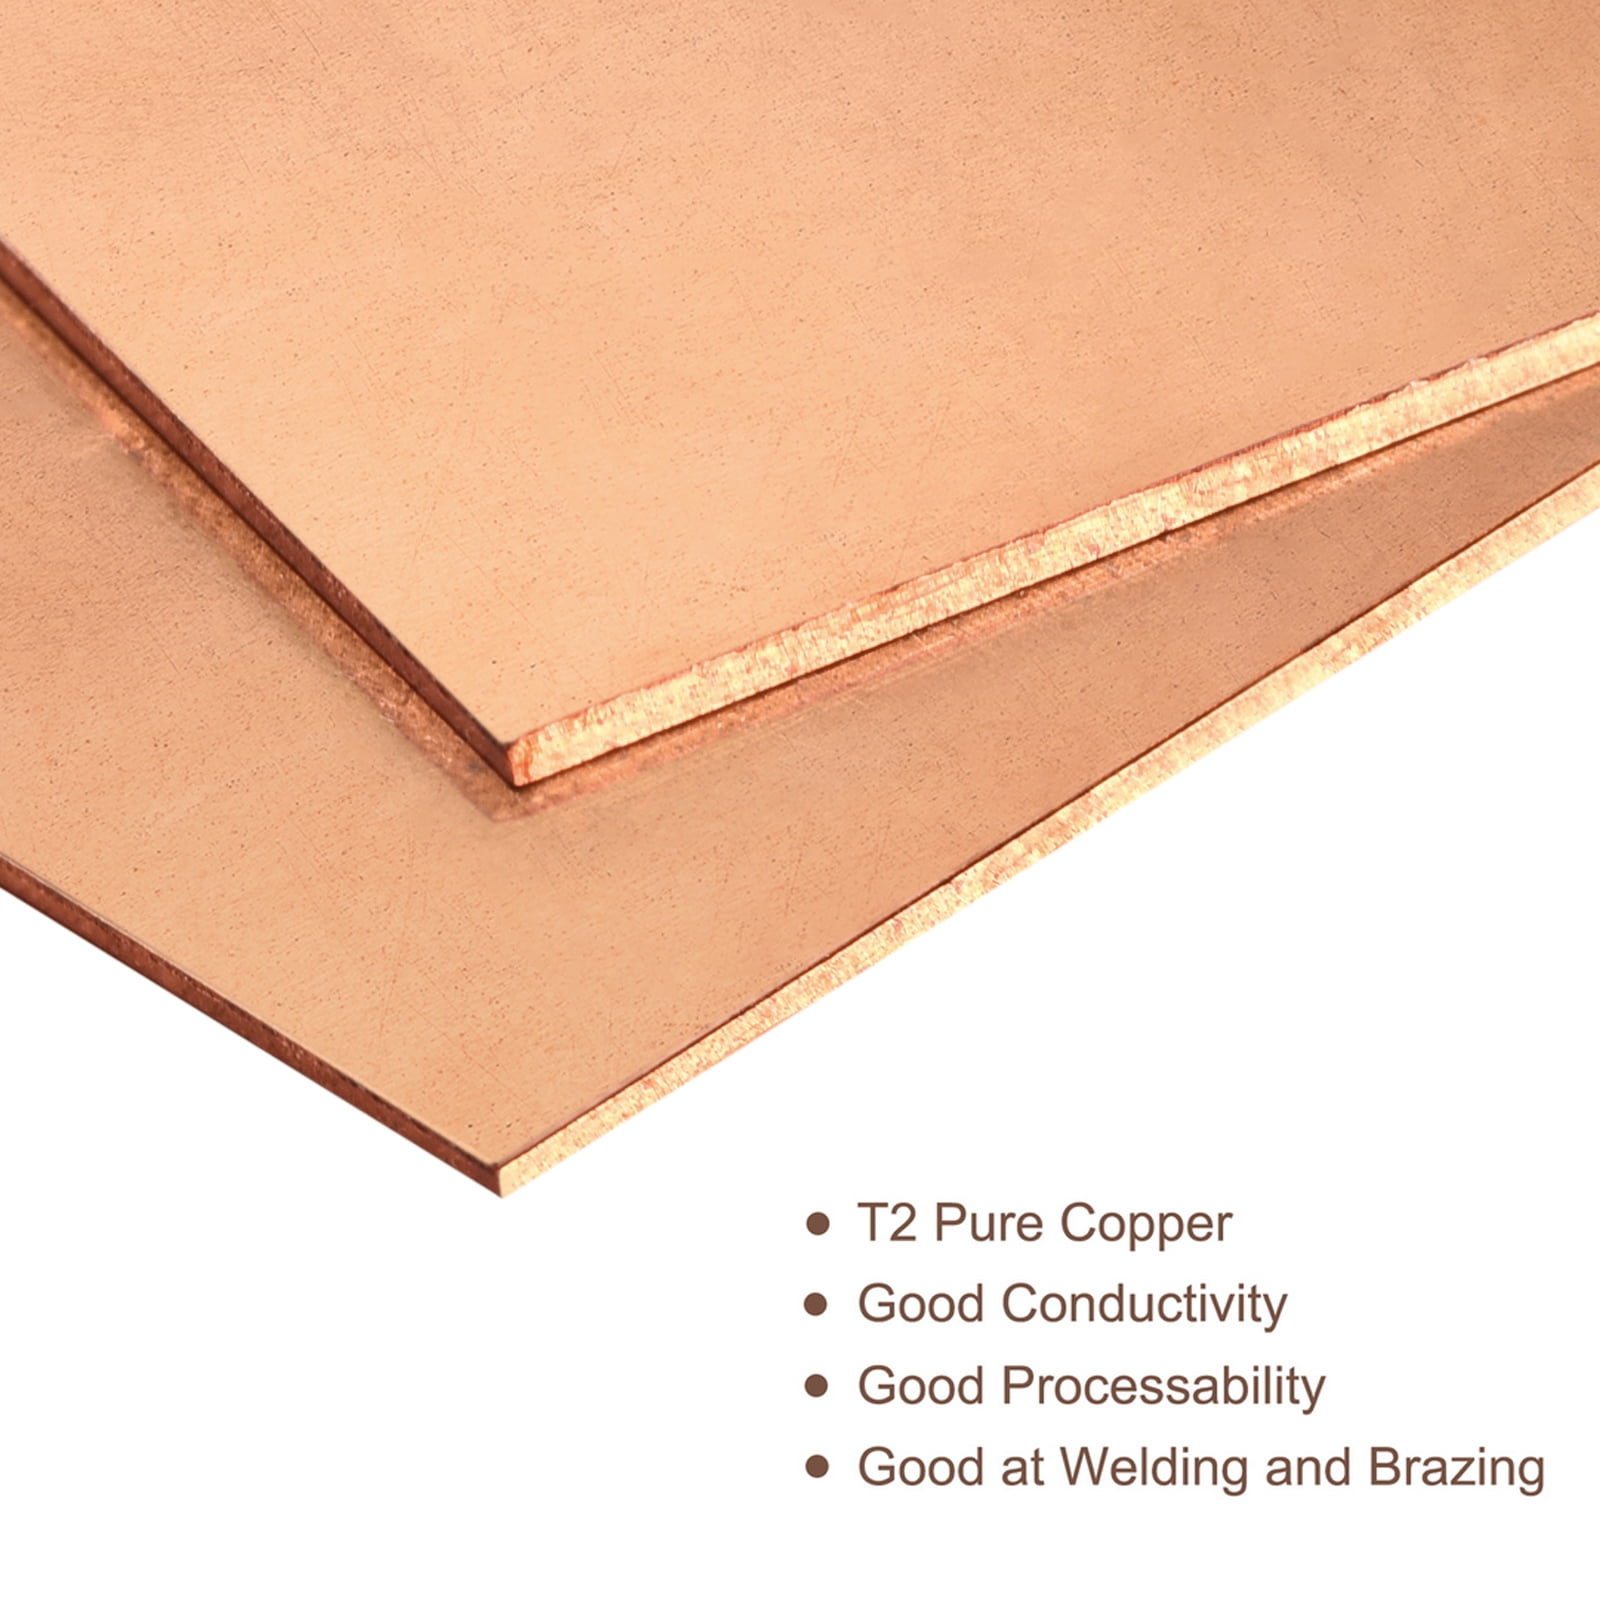 Uxcell Copper Sheet Metal Copper Plates 3.9 Length x 2 Width x 0.02  Thickness 2 Pack